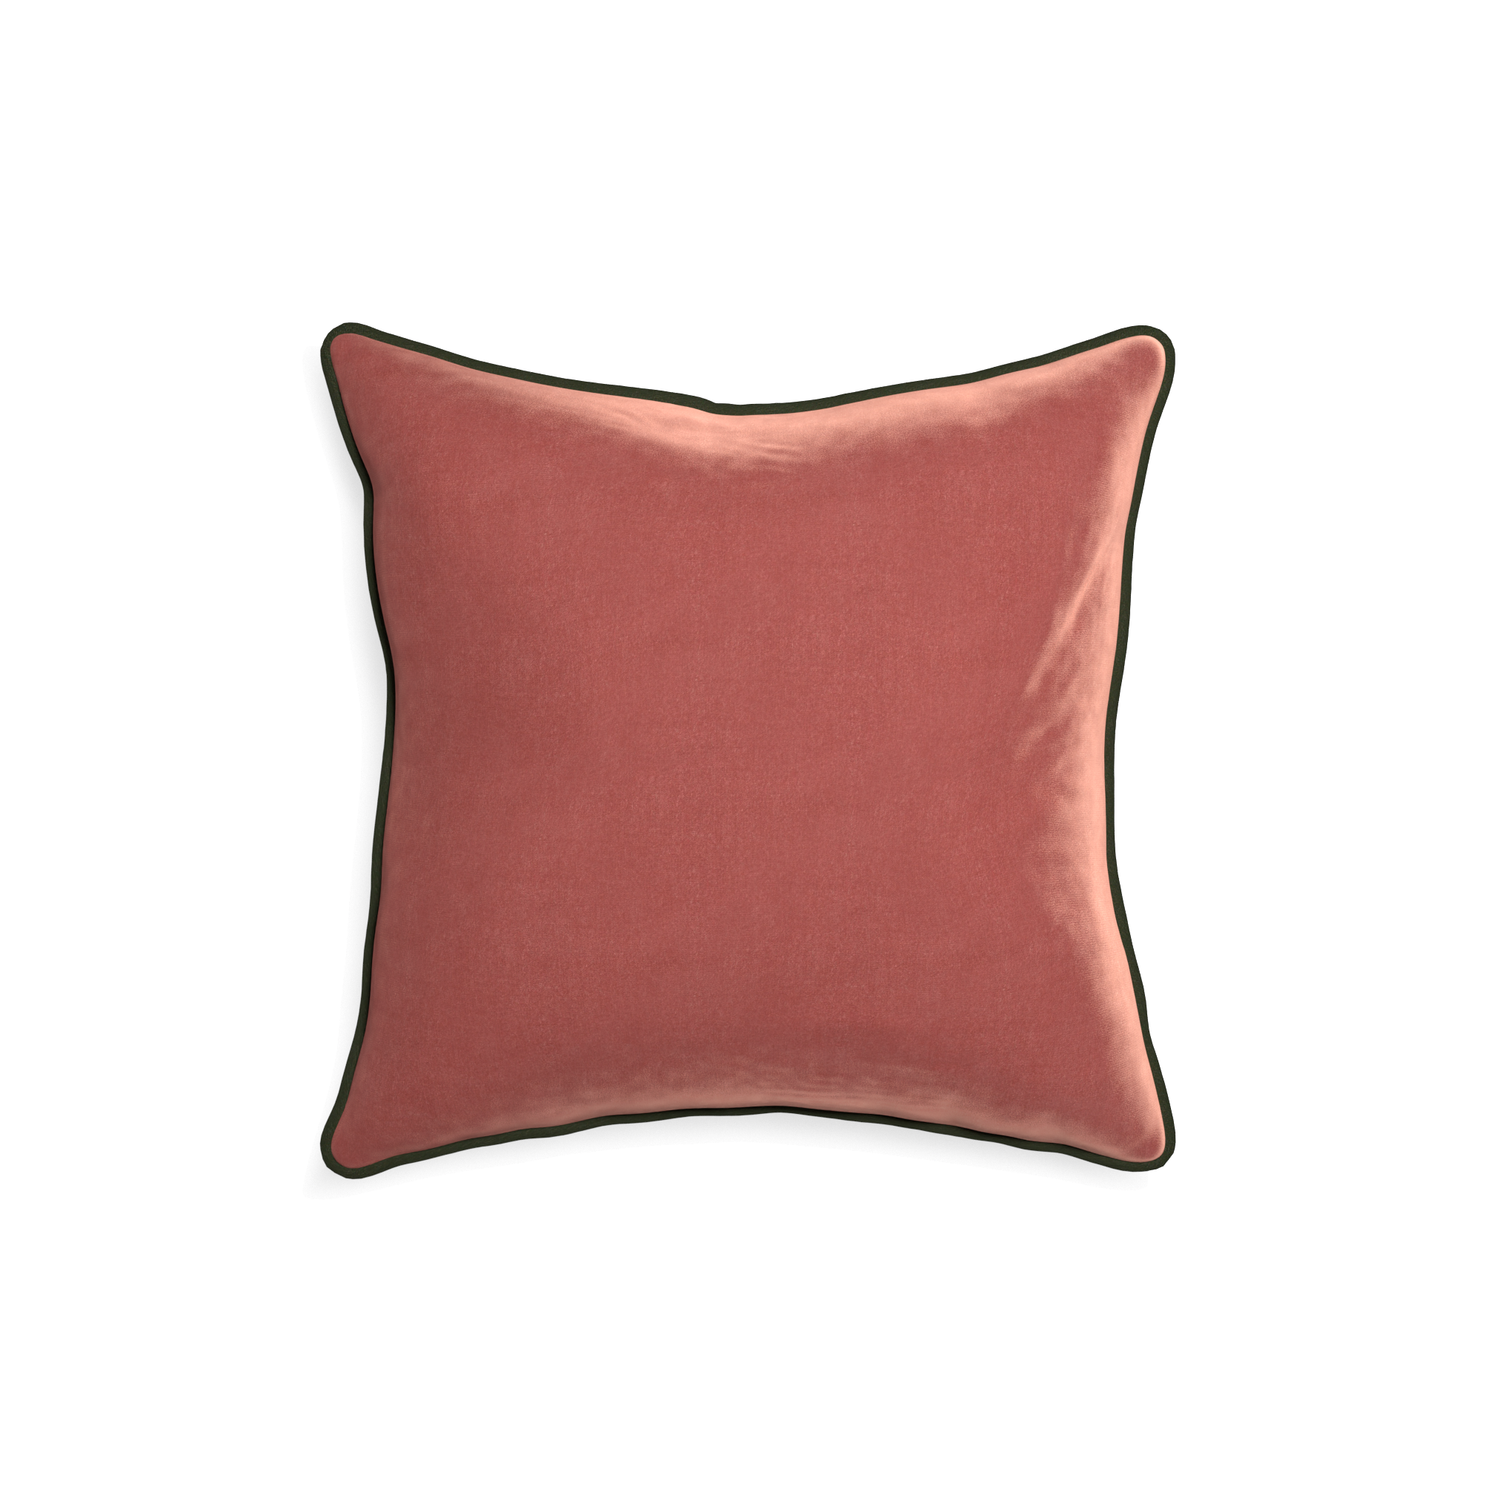 18-square cosmo velvet custom pillow with f piping on white background